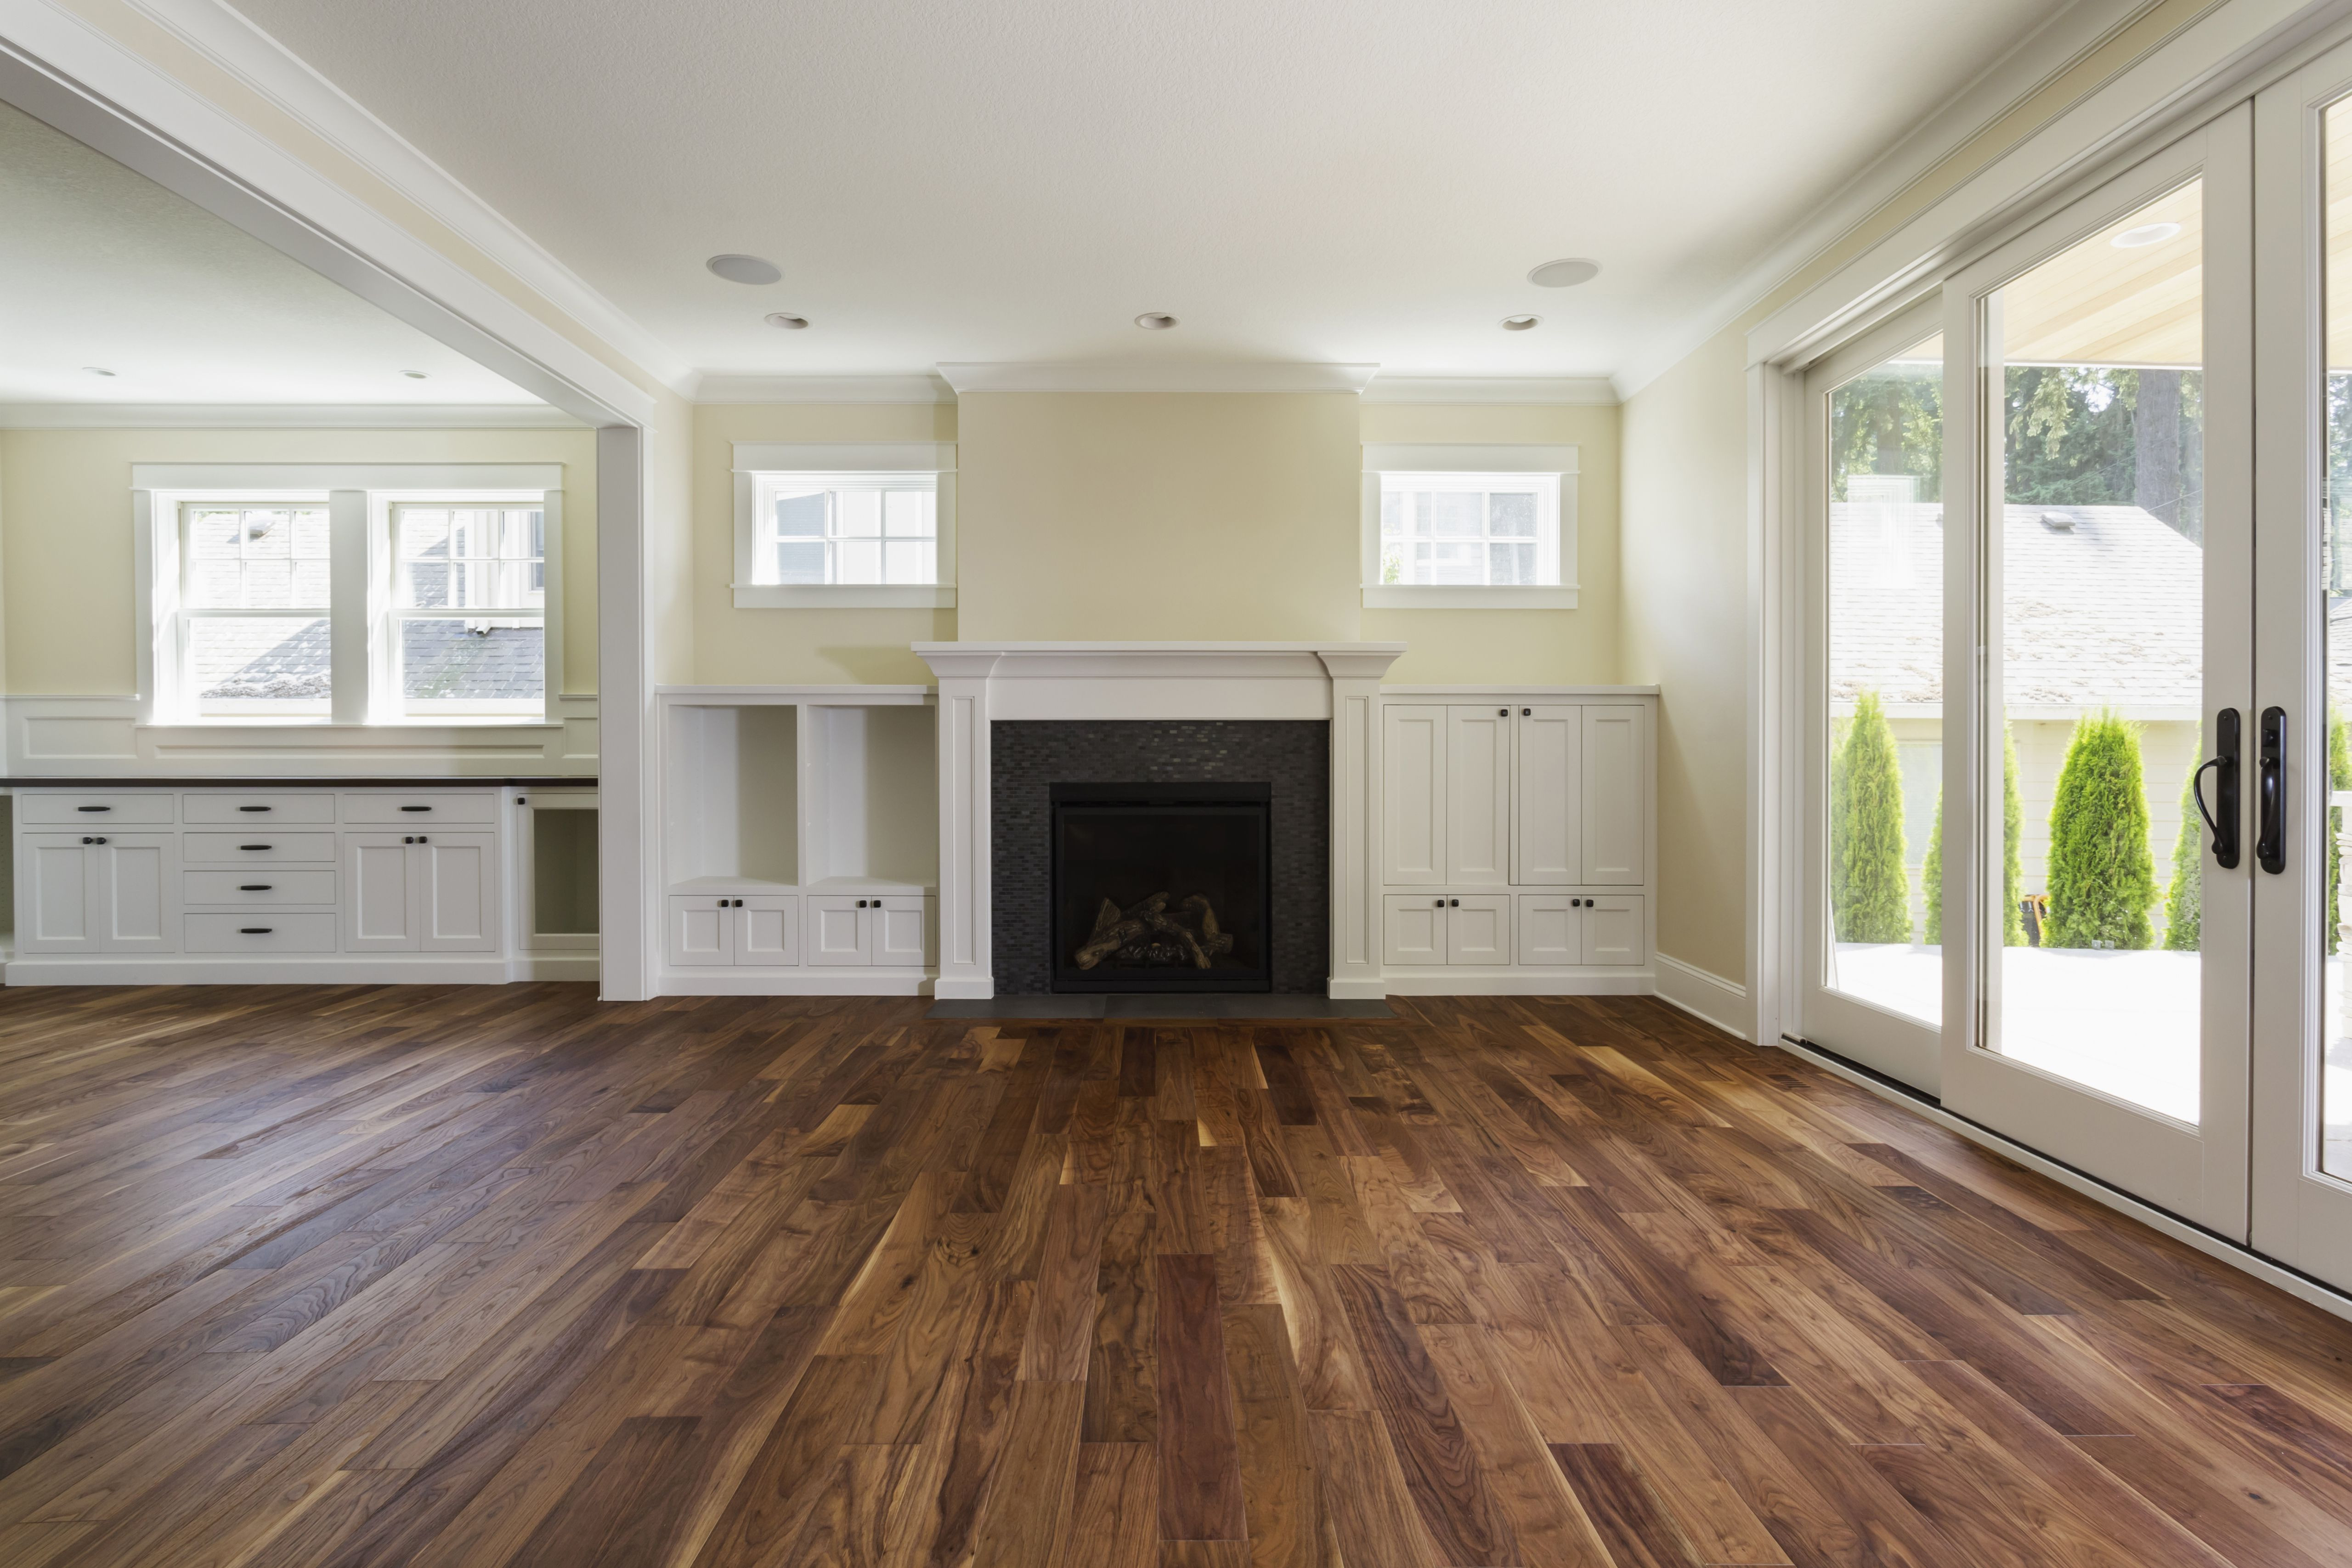 26 Stylish Bruce Engineered Cherry Hardwood Flooring 2024 free download bruce engineered cherry hardwood flooring of the pros and cons of prefinished hardwood flooring throughout fireplace and built in shelves in living room 482143011 57bef8e33df78cc16e035397